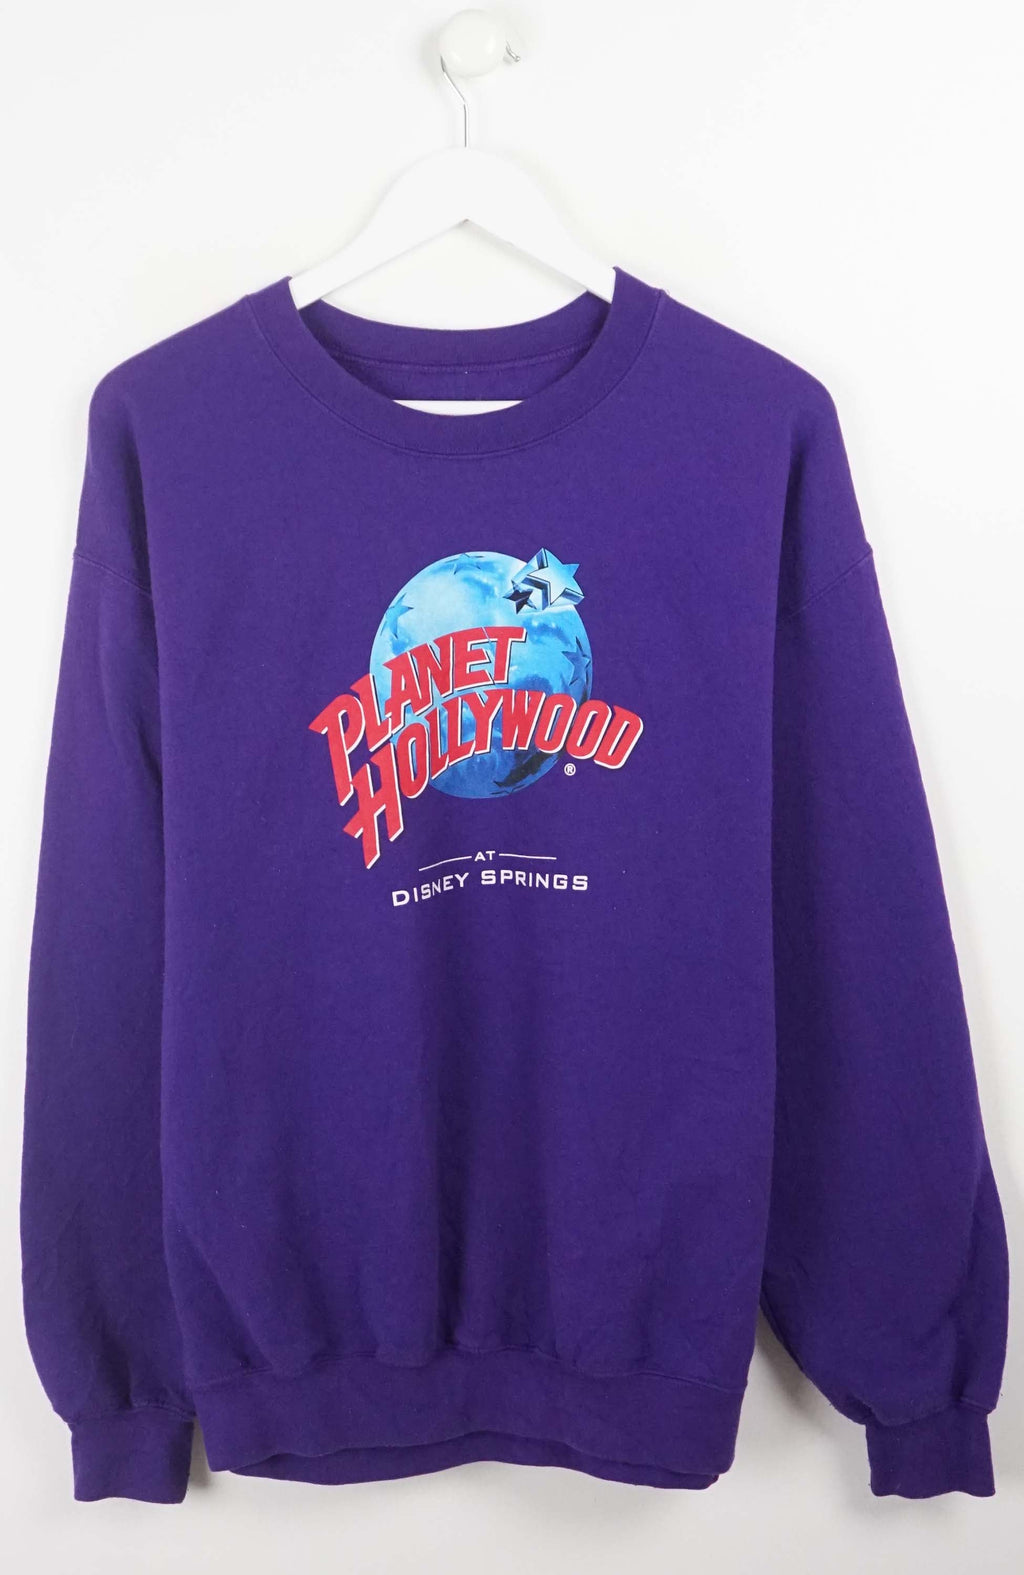 VINTAGE PLANET HOLLYWOOD SWEATER (L)